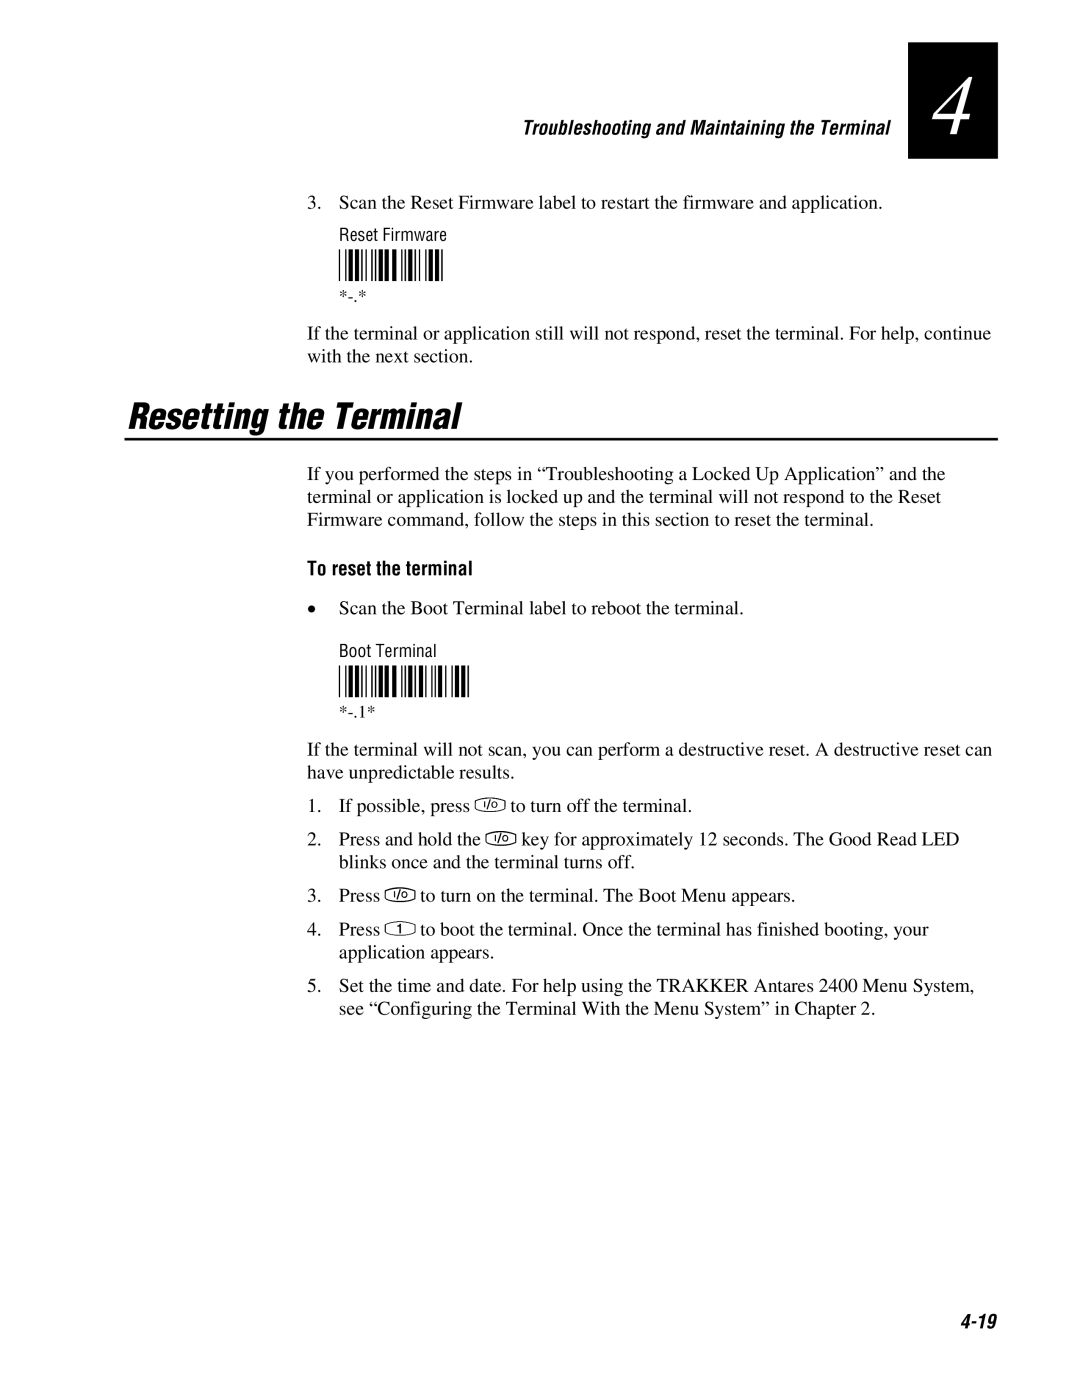 IBM 243X user manual Resetting the Terminal, To reset the terminal, 4-19 